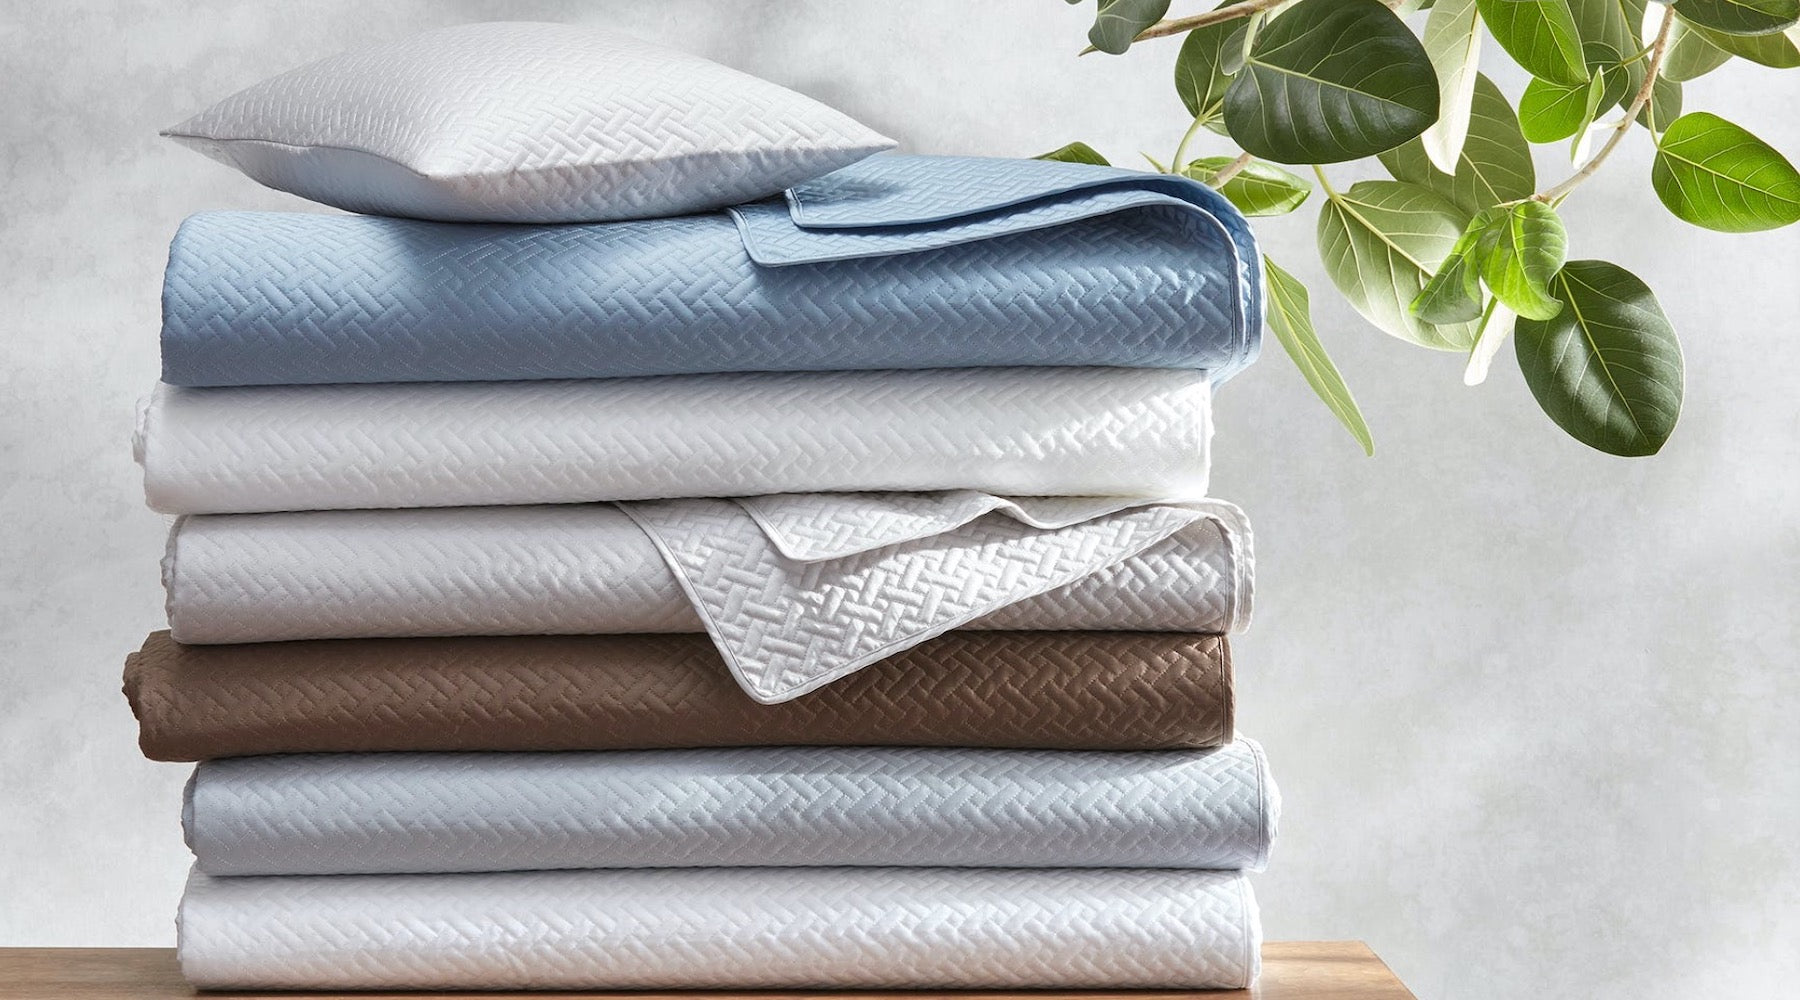 Matouk Basketweave Quilts - Luxurious Quilted Coverlets that you can shop from the comfort of home. Our online boutique has every color and size of this luxurious fine linens coverlet in a quilted sateen fabric. Matouk Bedding at Fig Linens and Home.